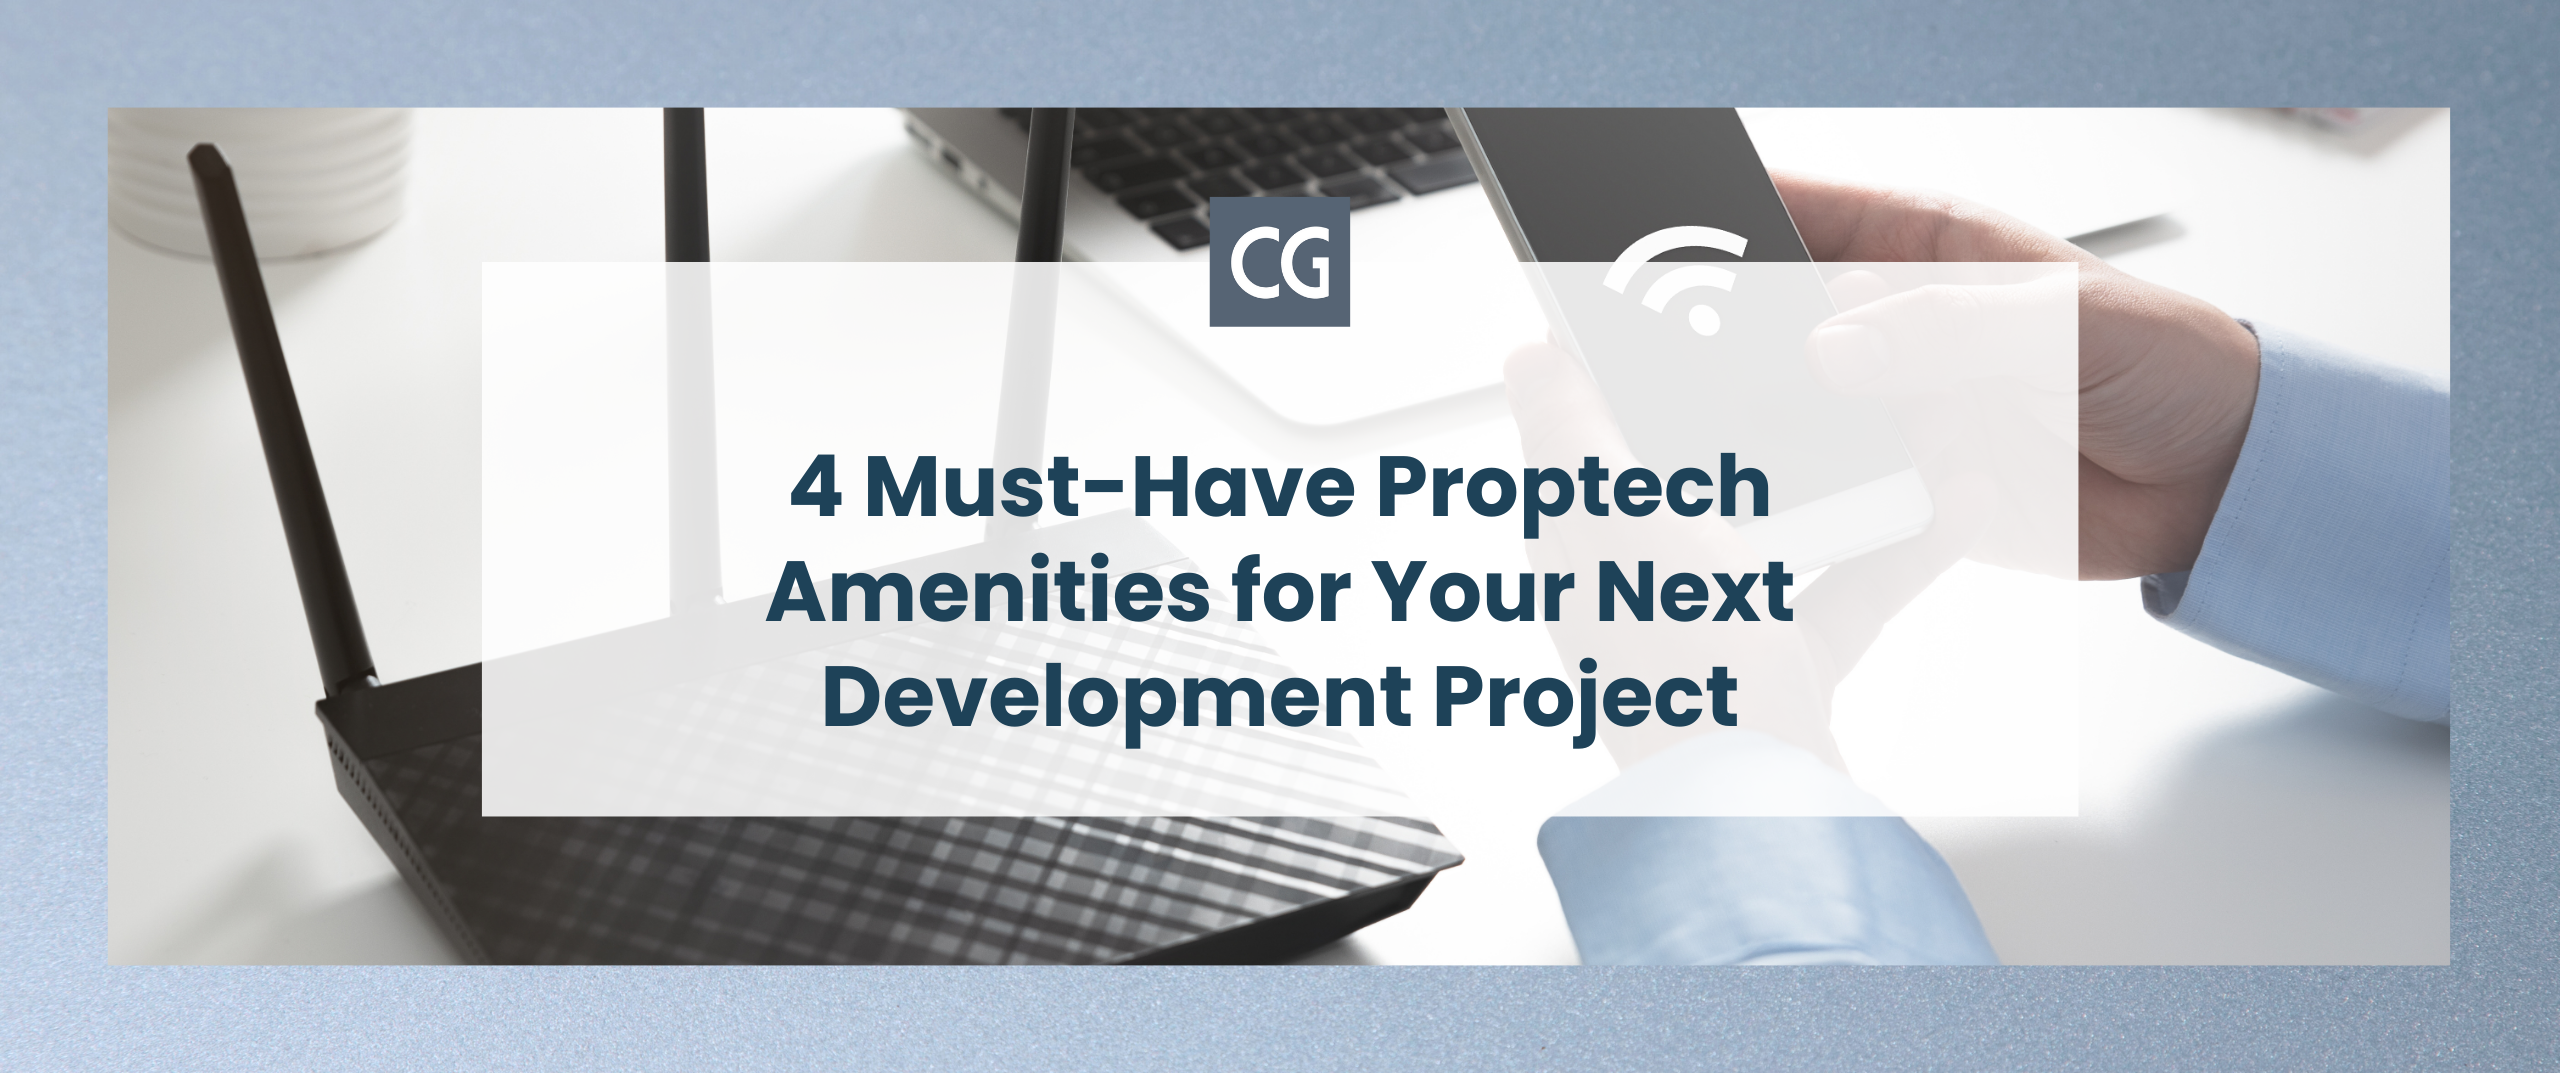 4 Must-Have Proptech Amenities for Your Next Development Project